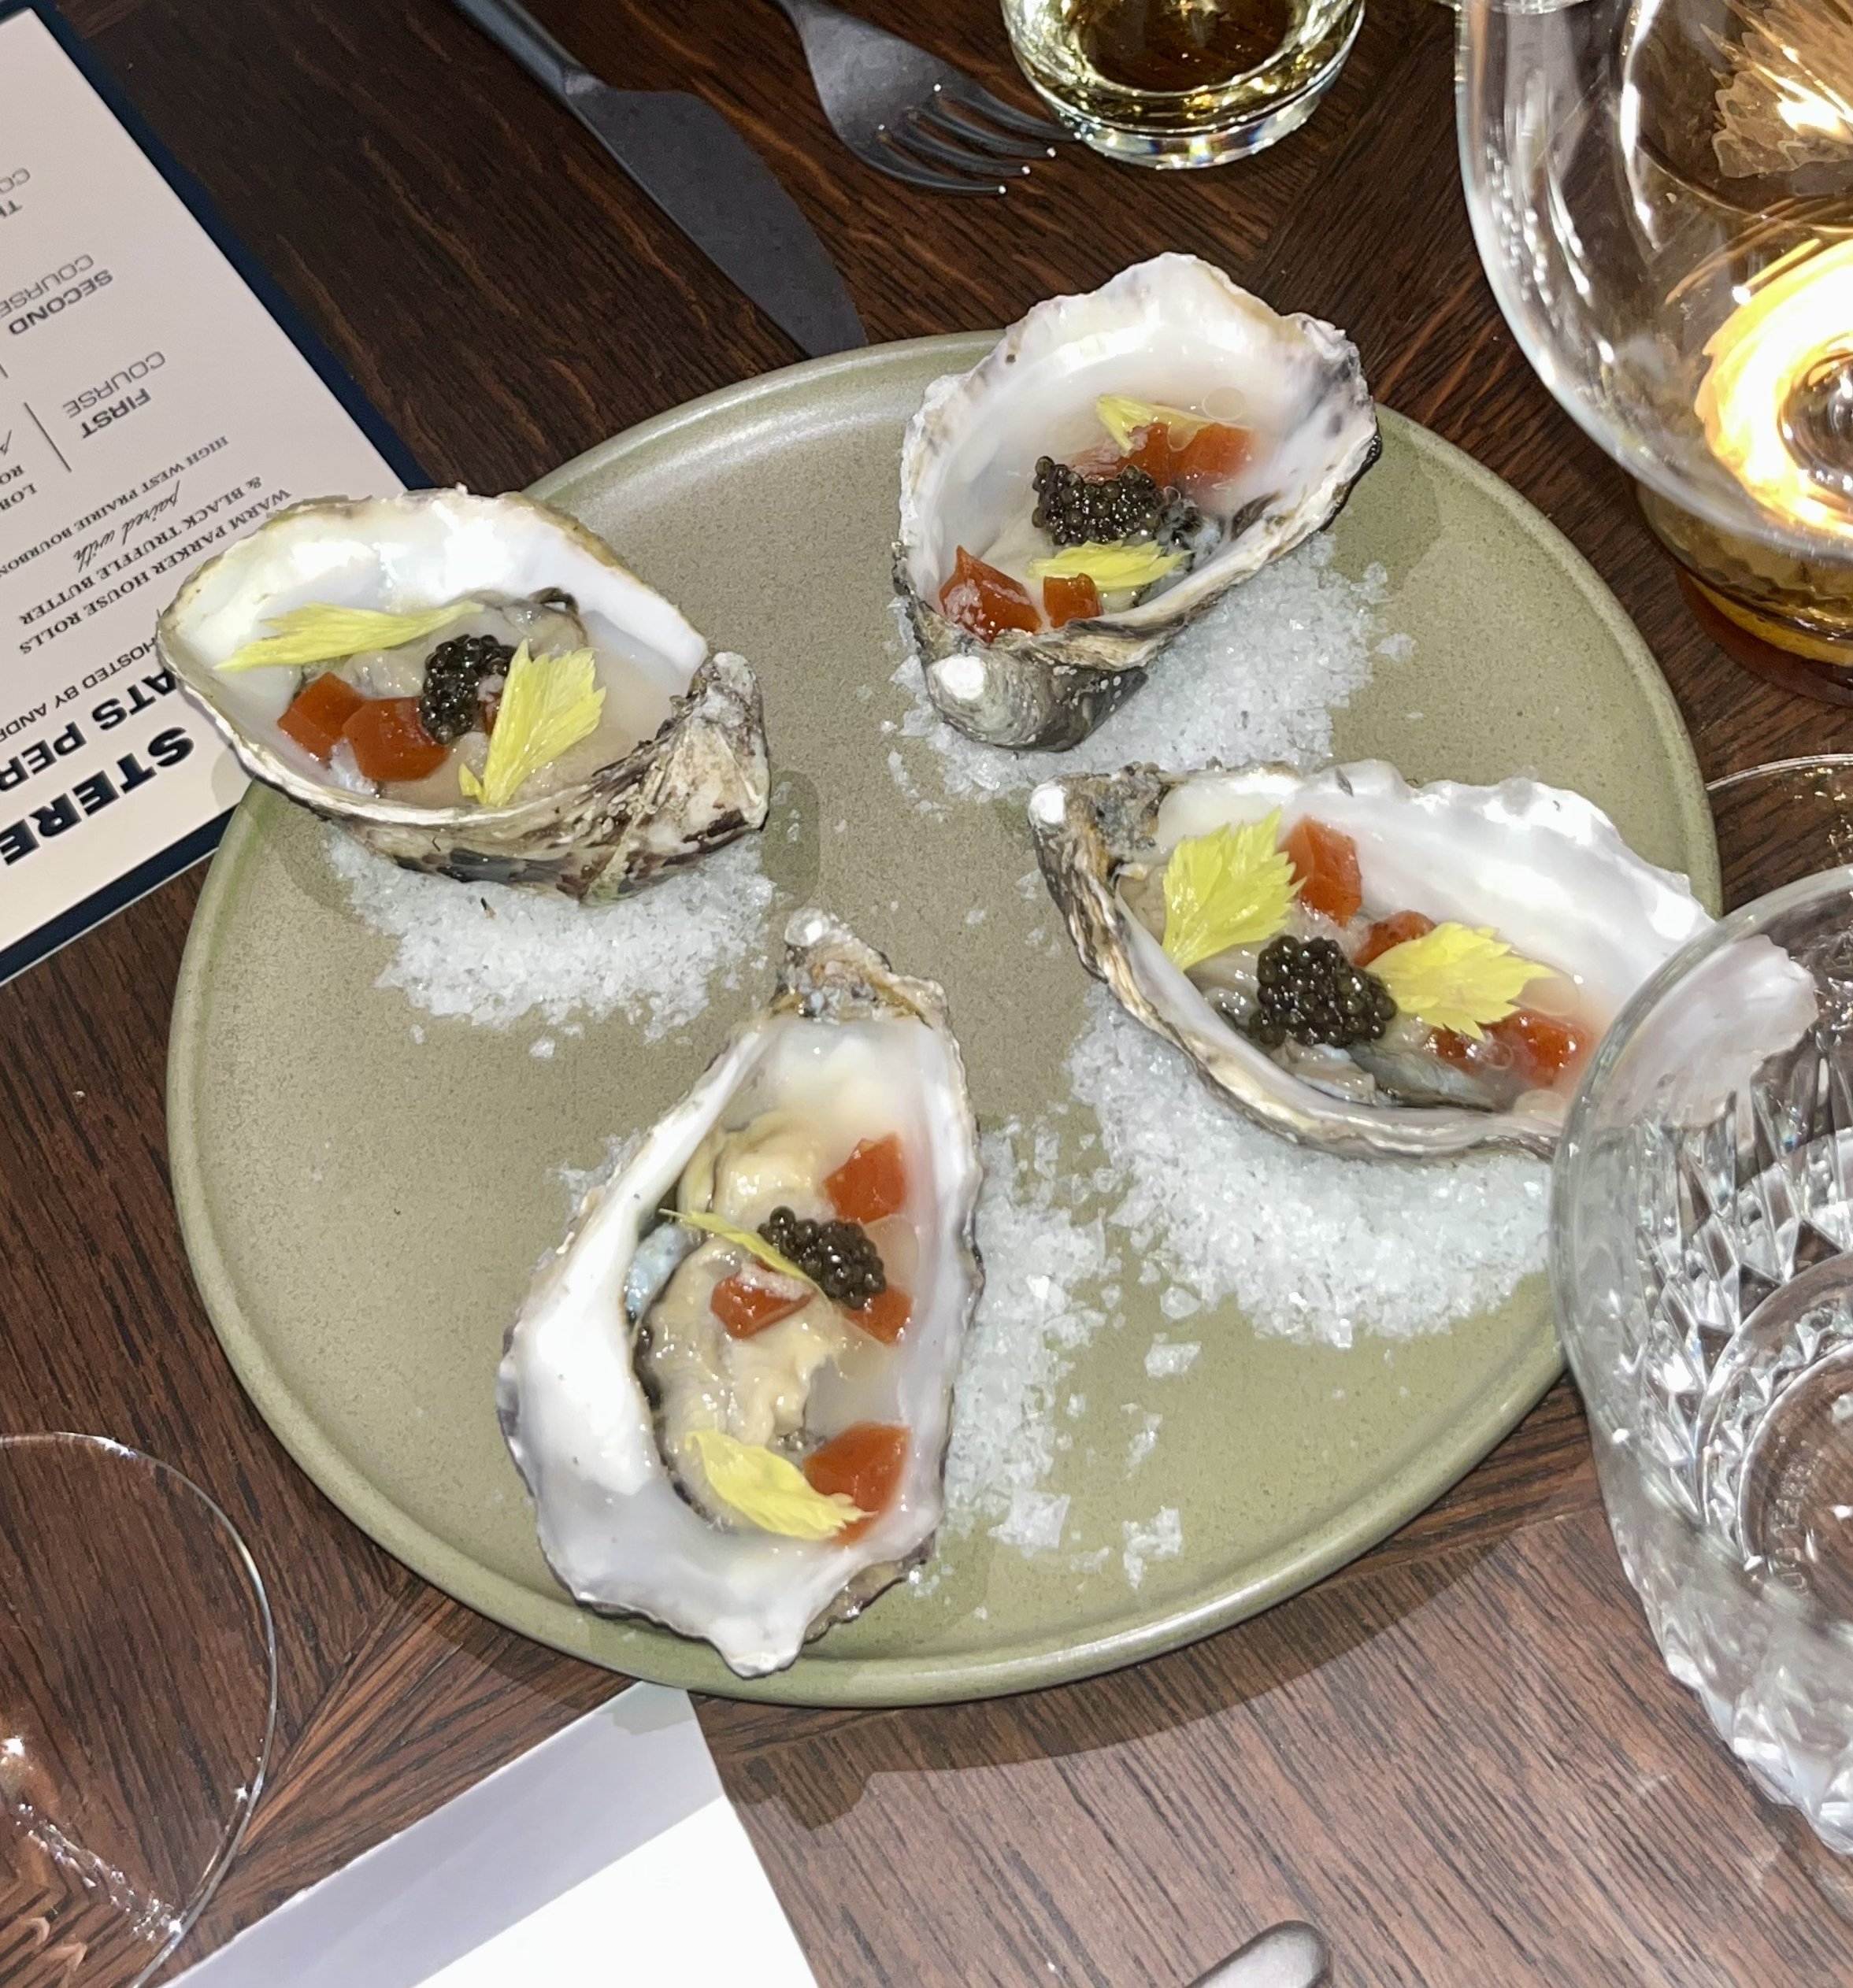 Stereo supper club - Oyster dish